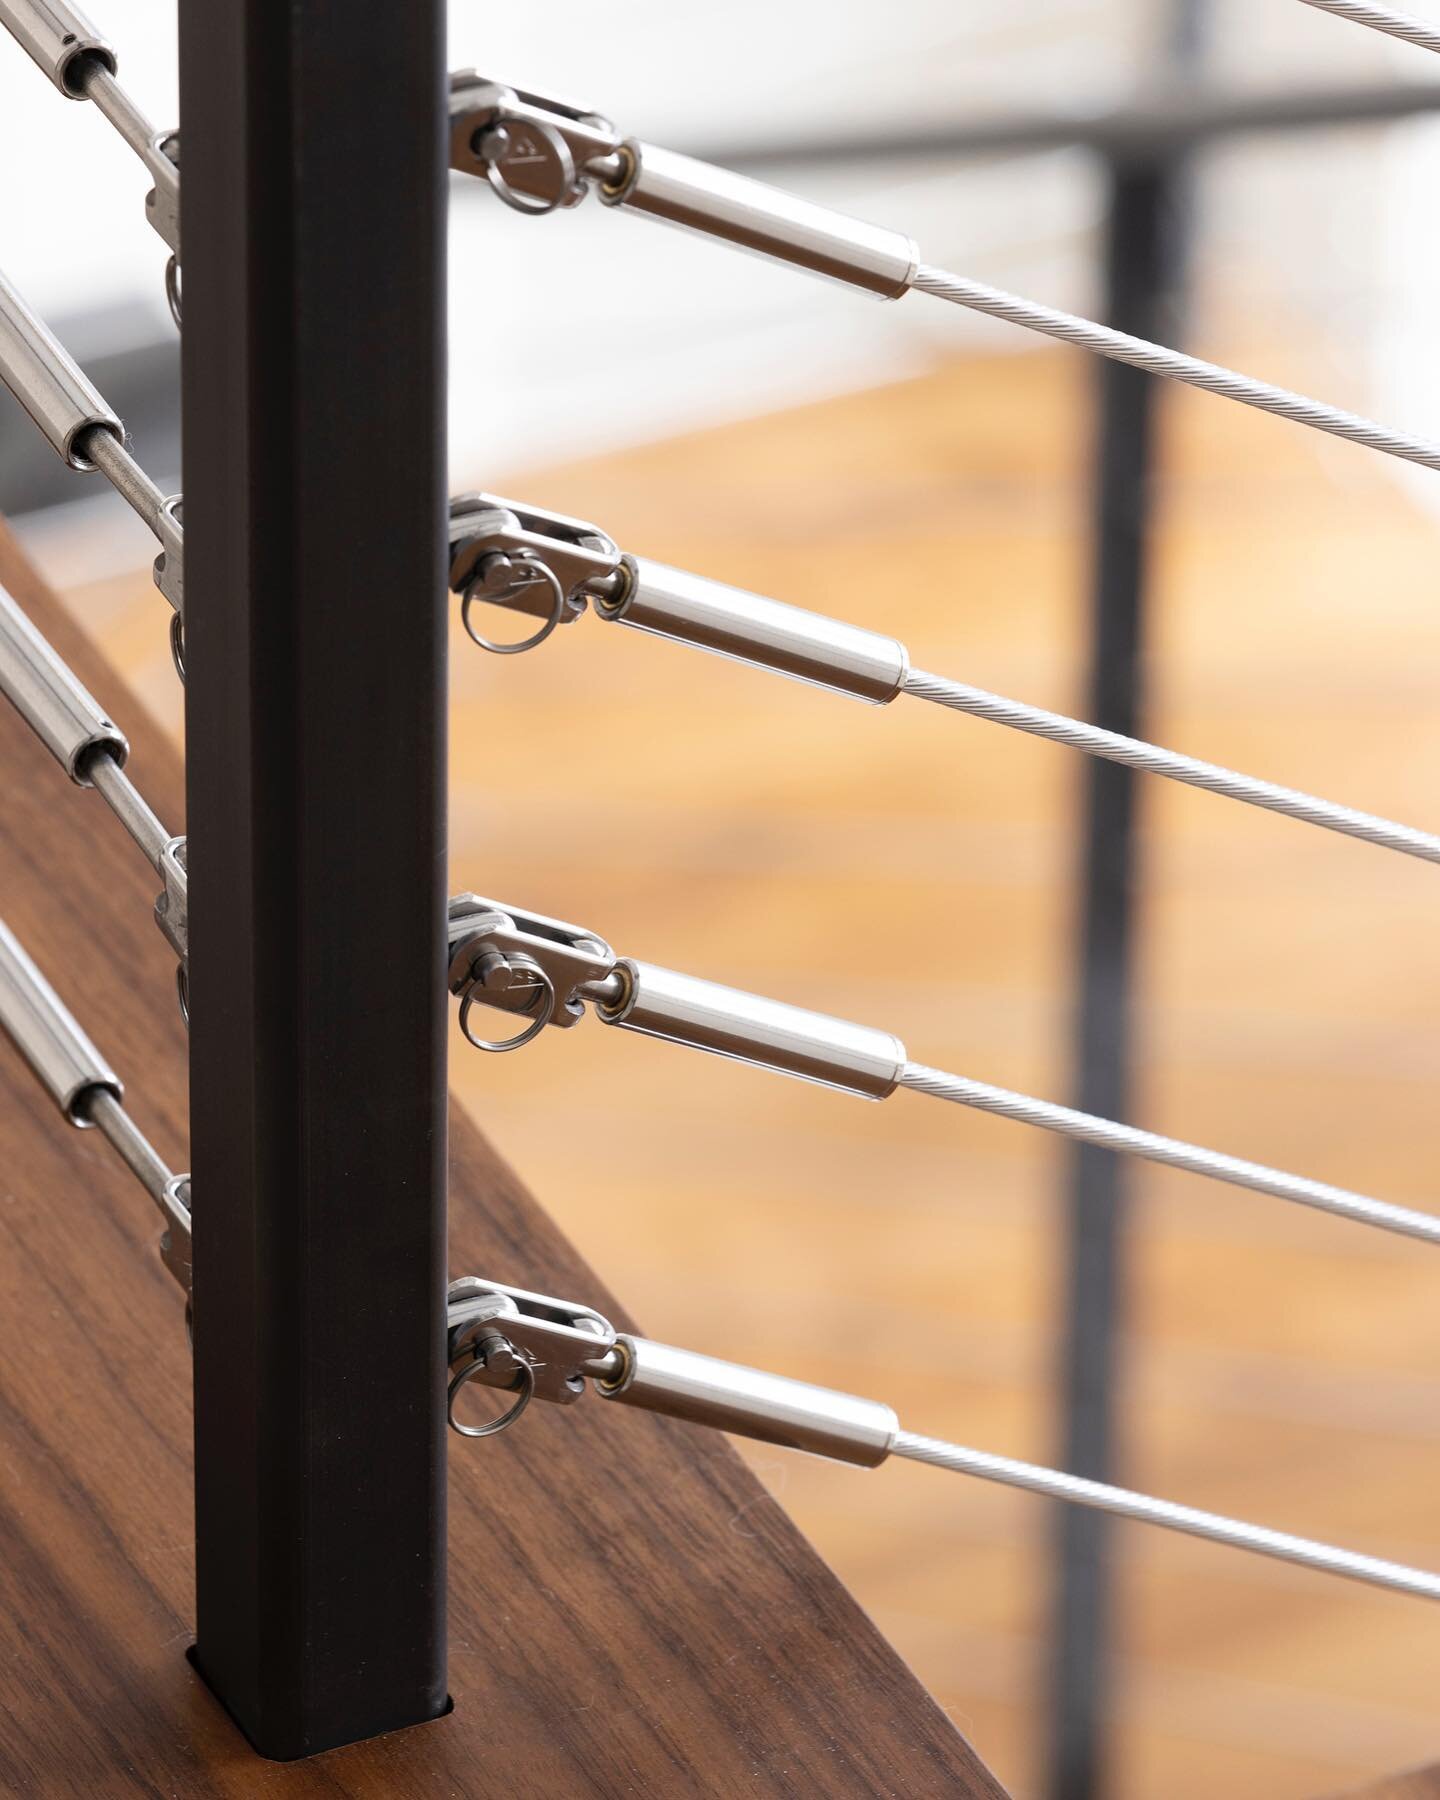 Ready for our close up &mdash; always. #bauermetal
 
 
 
 
#cablerailing #modernhome #custommetalfabrication #weldernation #railings #stairs #metalwork #architexture #custommade